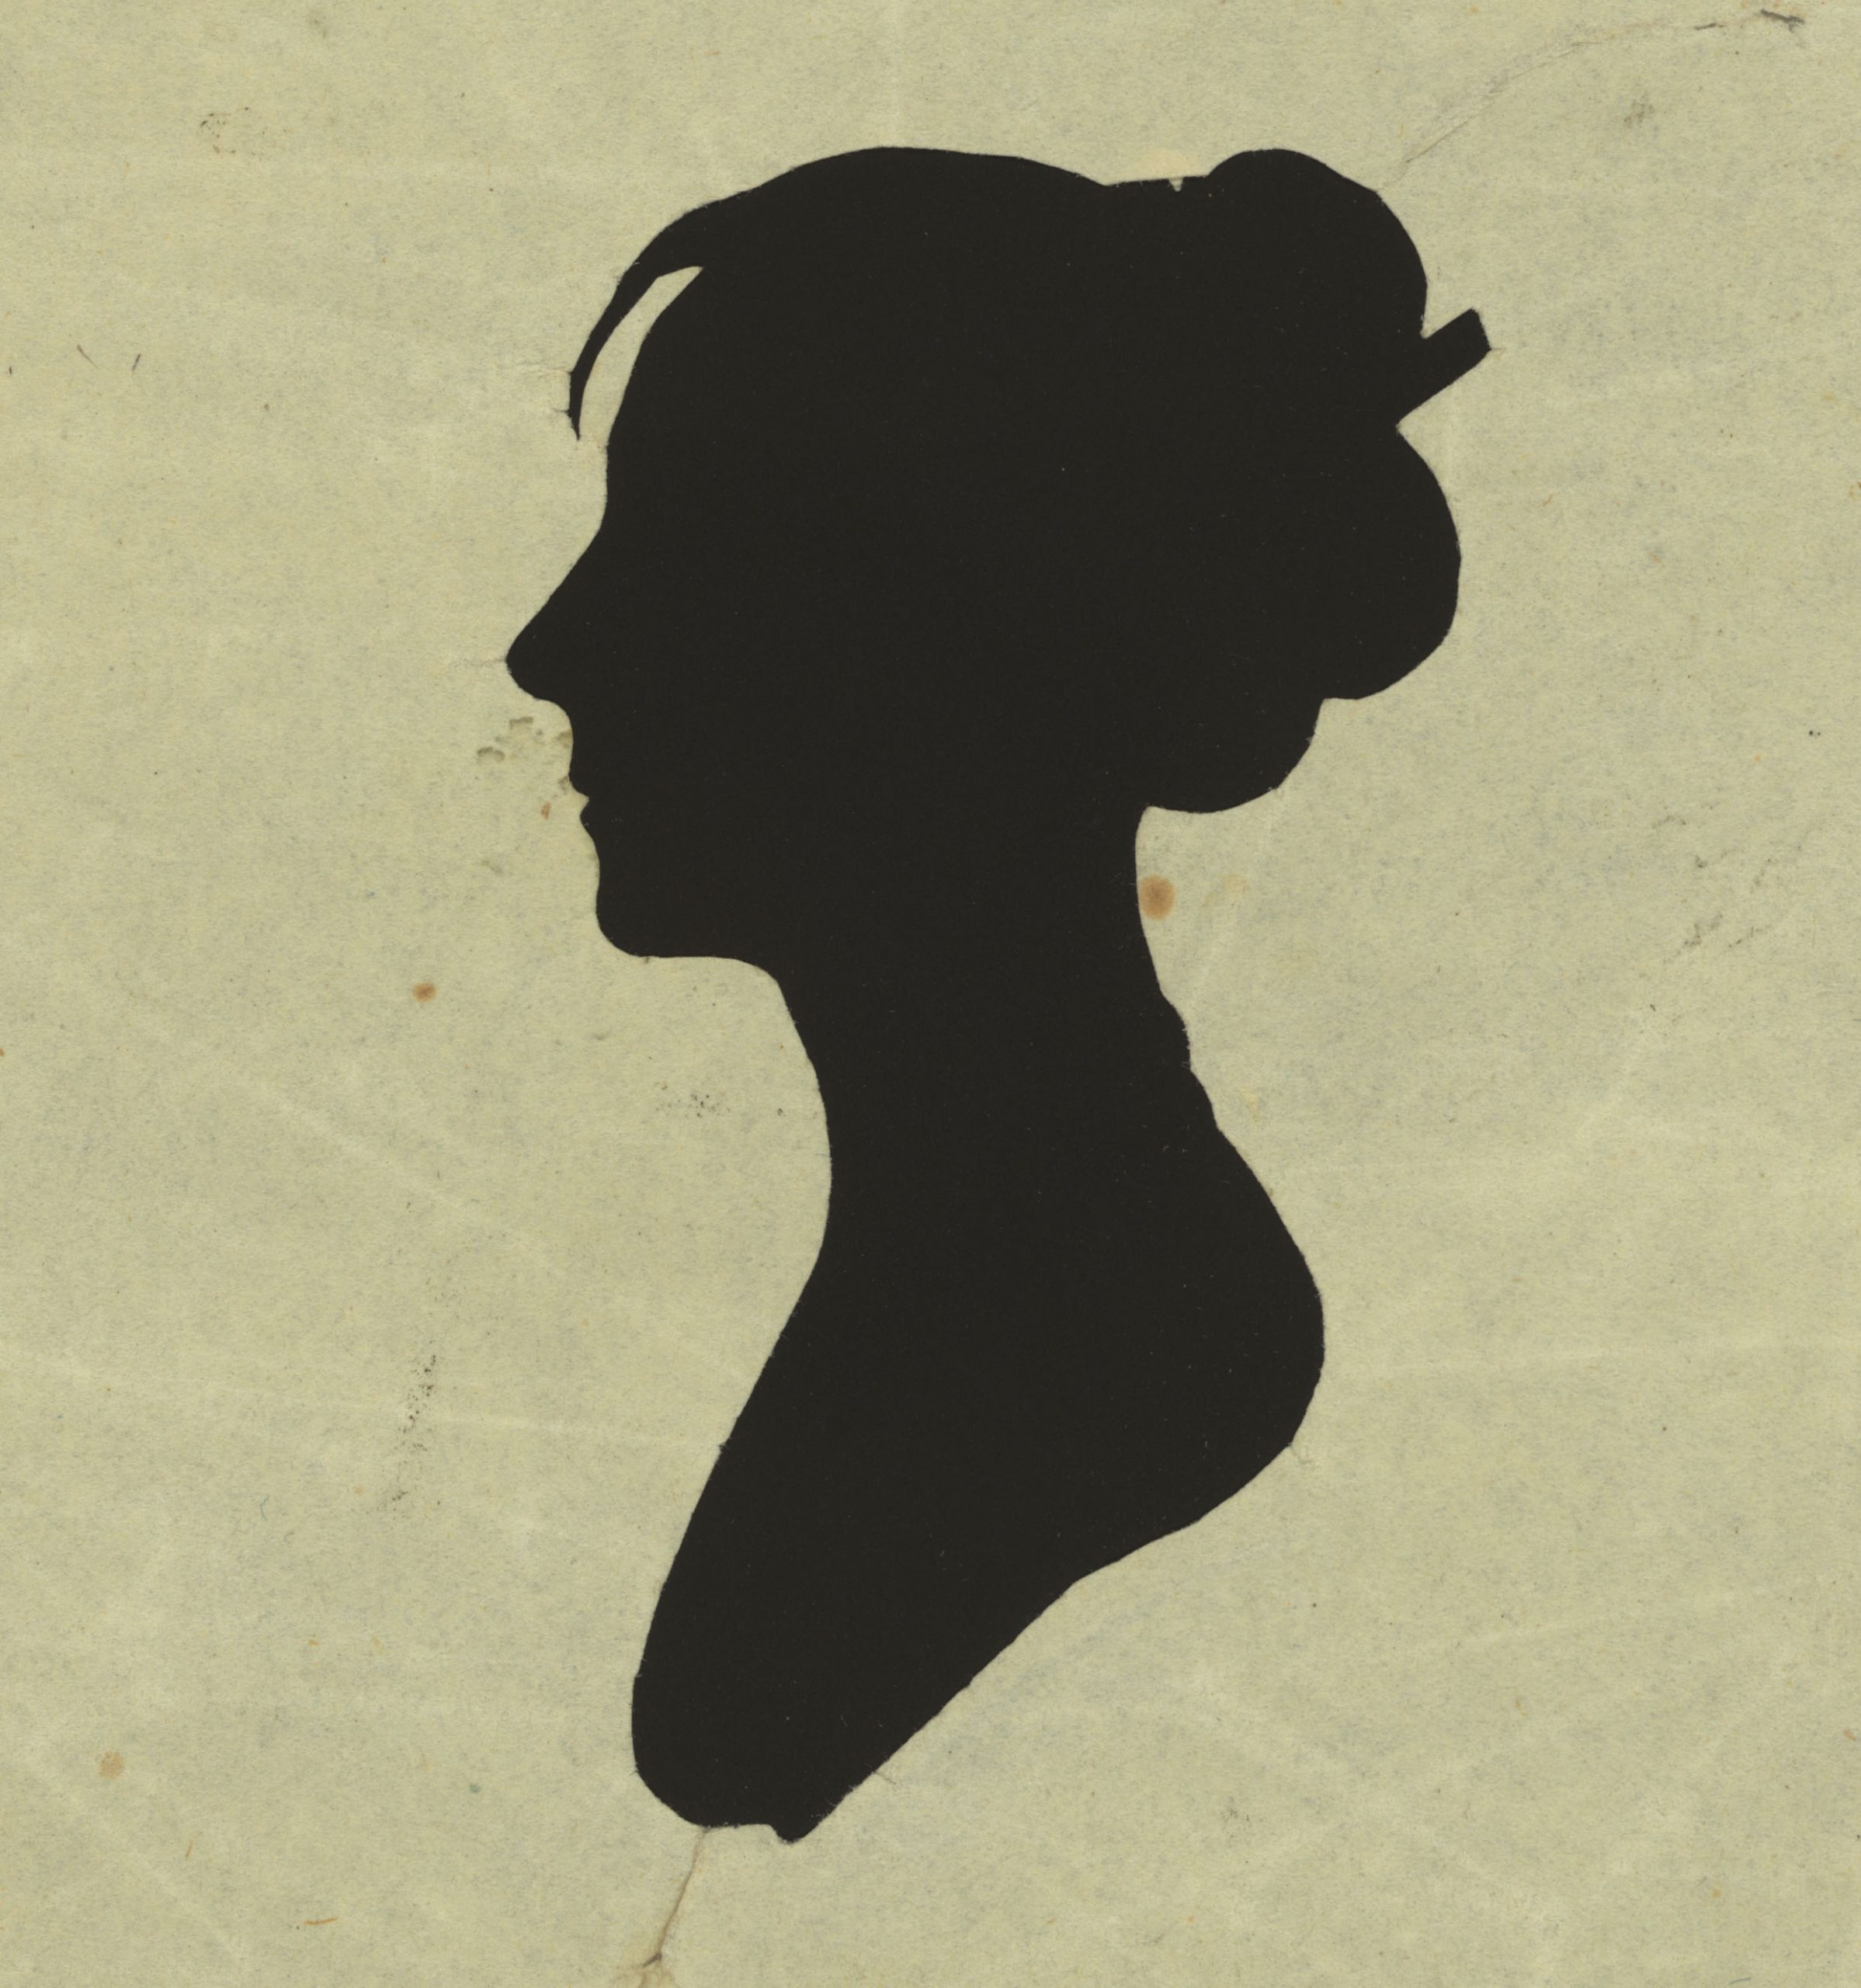 A silhouette of an unknown woman from the 1700s by Charles Peale.